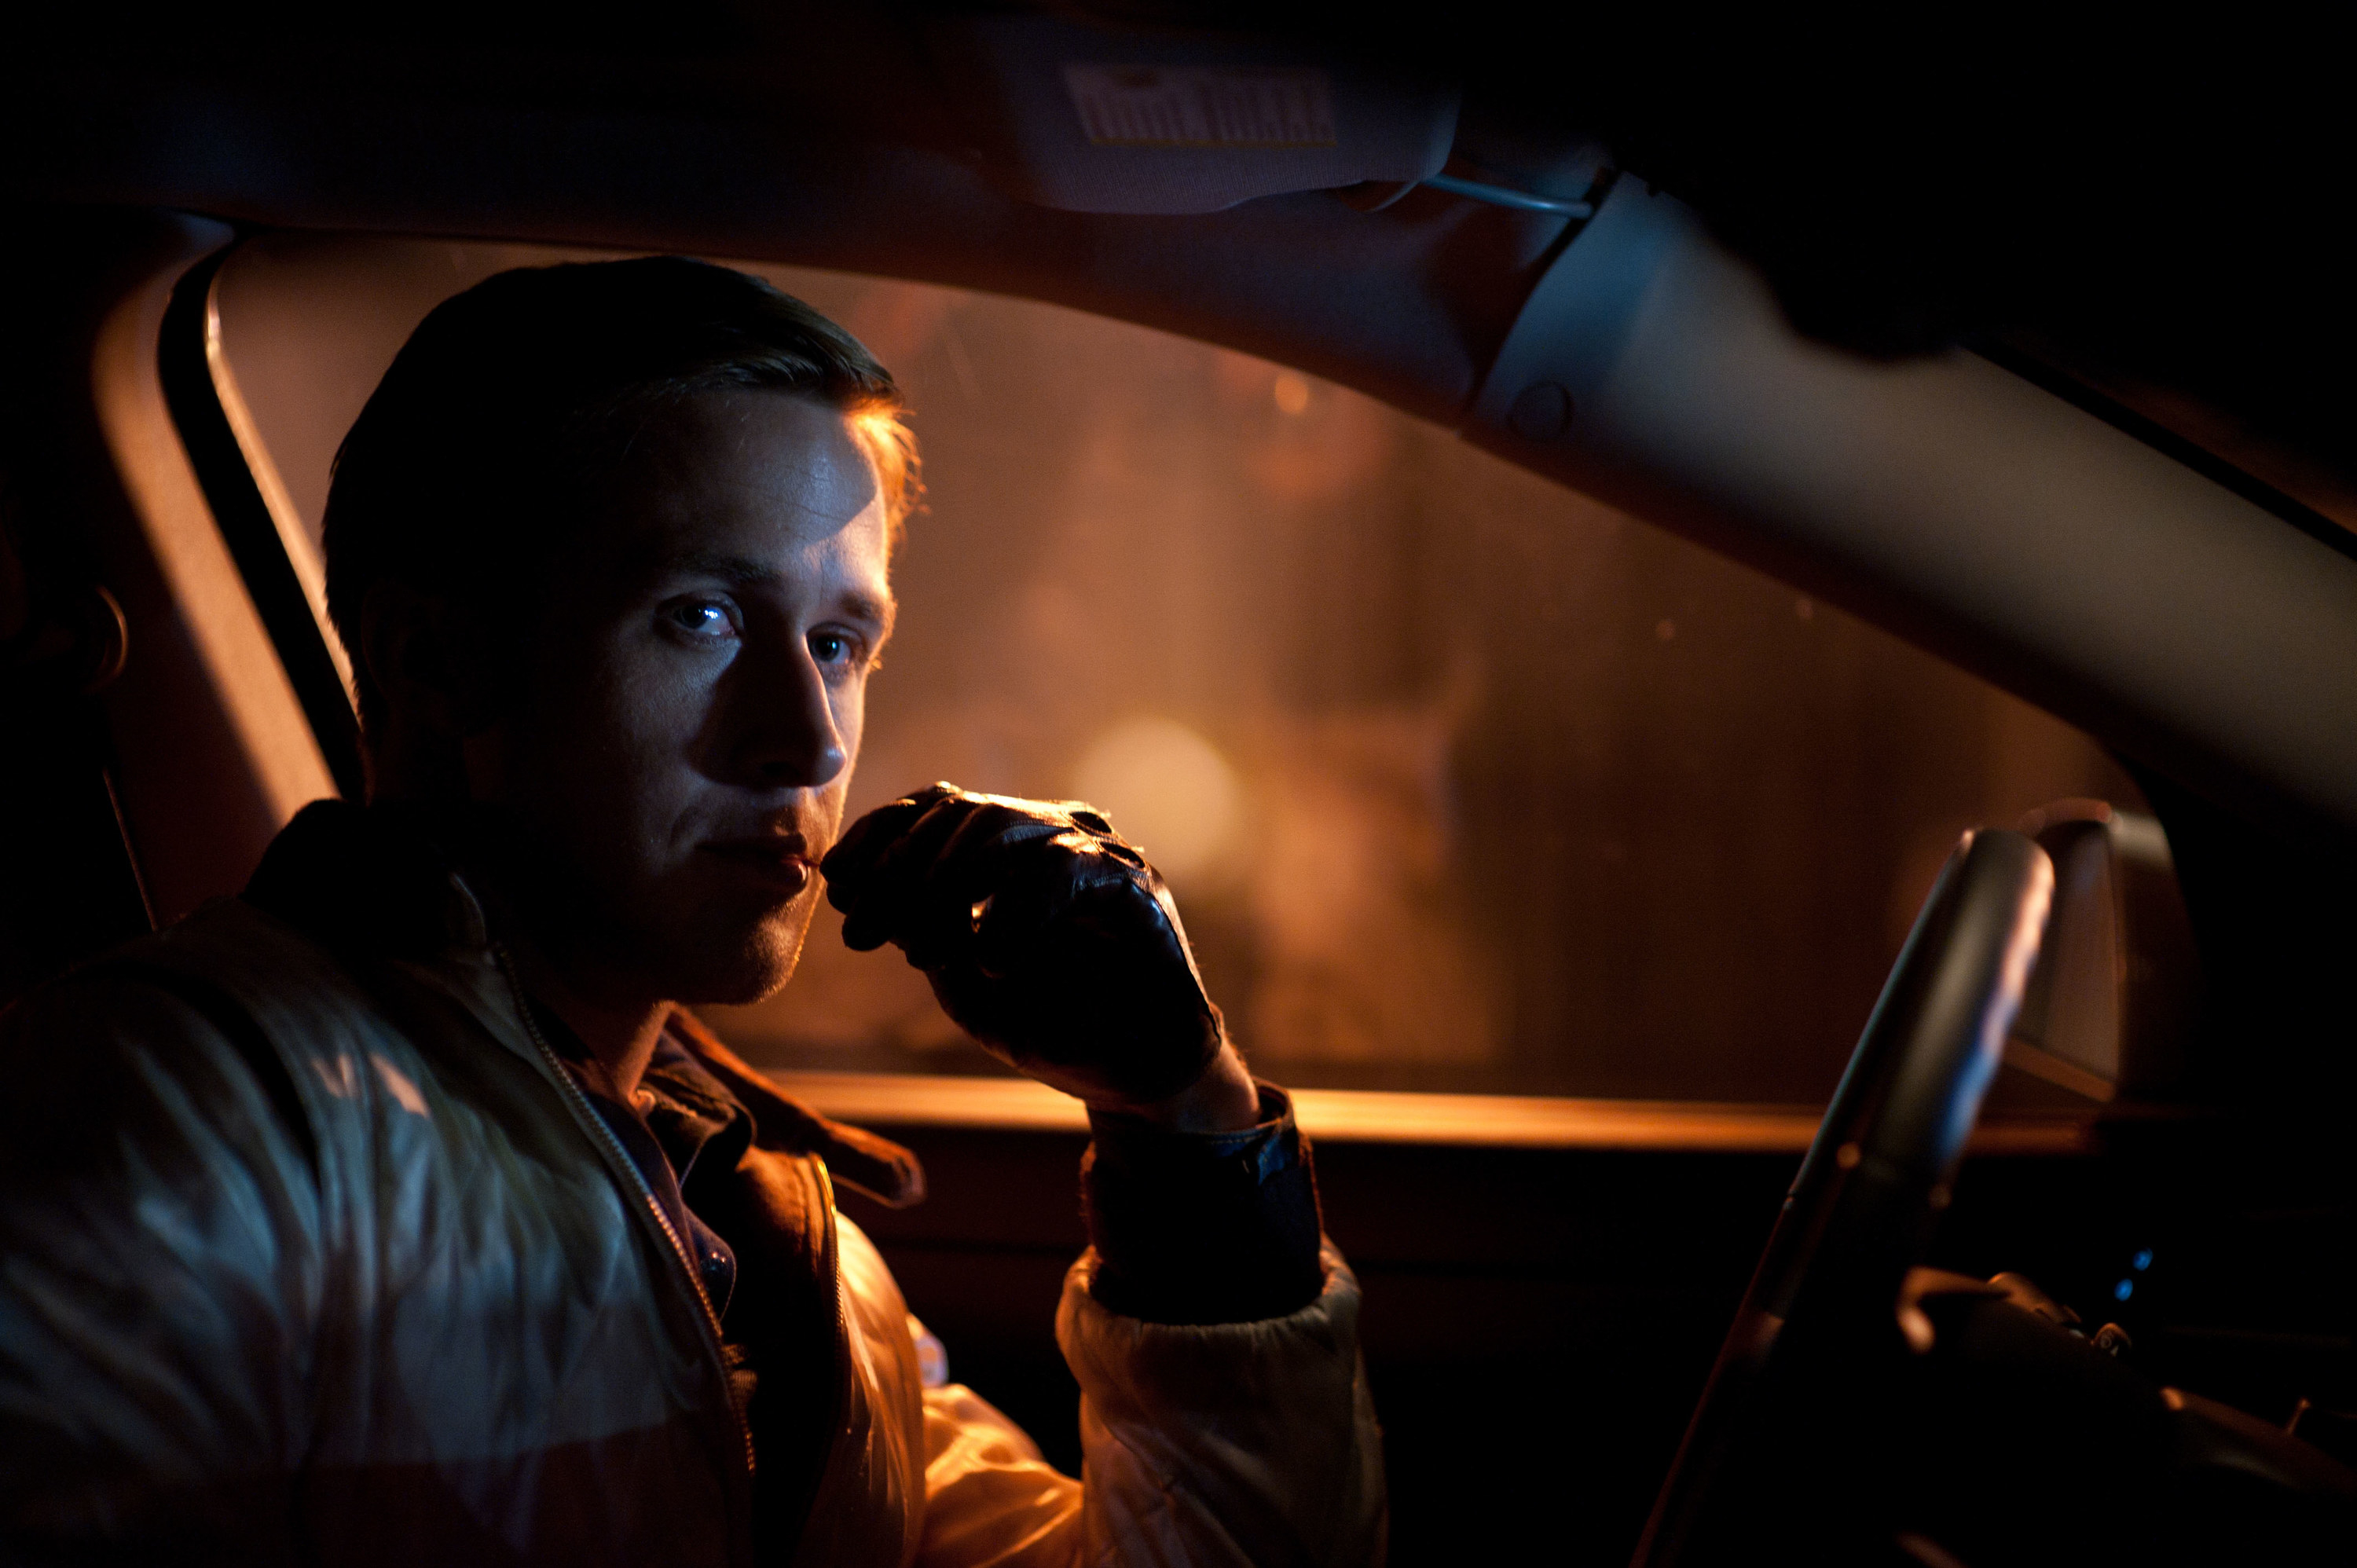 Ryan Gosling sits in a car, holding a toothpick to his mouth with leather gloves